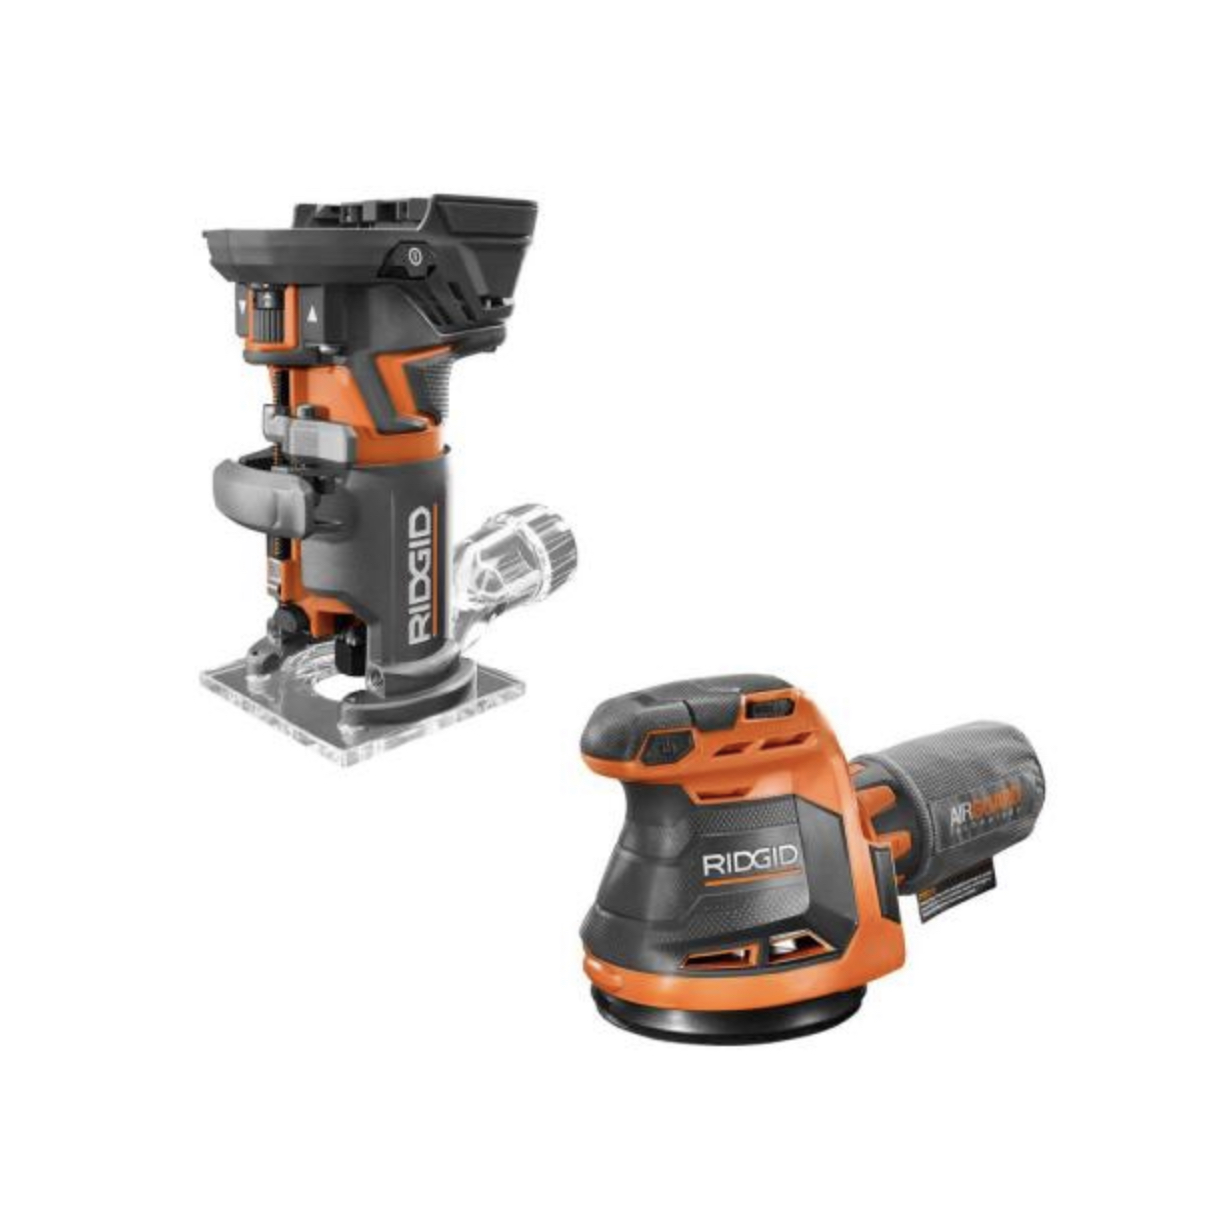 Ridgid 18-Volt OCTANE Cordless Brushless Compact Fixed Base Router and Random Orbital Sander at Home Depot (Tools only) $129